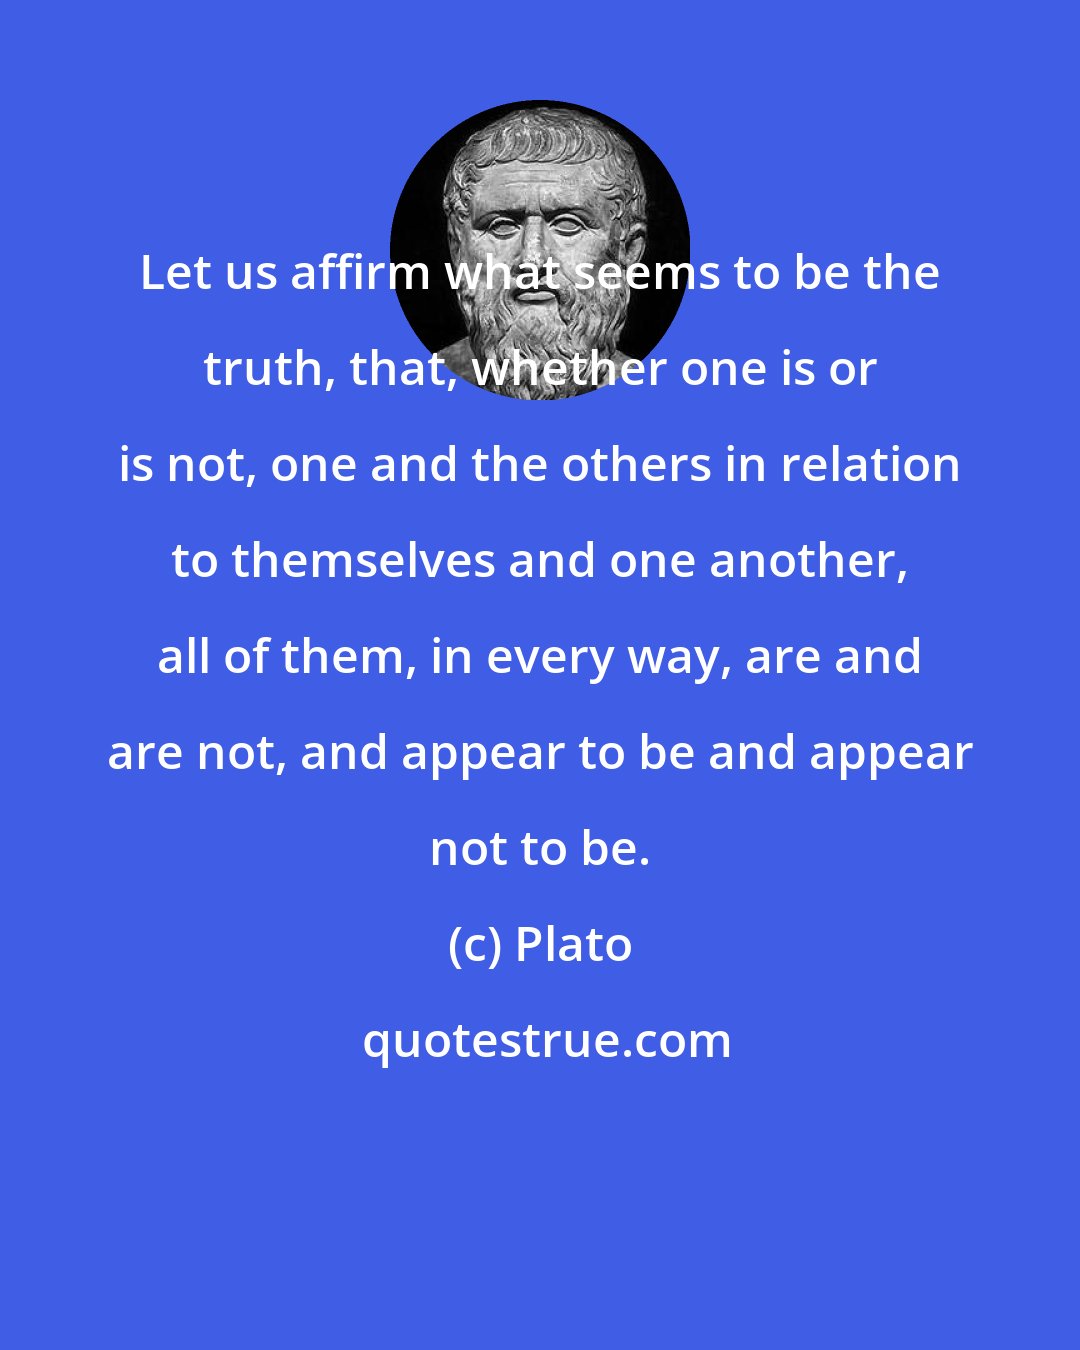 Plato: Let us affirm what seems to be the truth, that, whether one is or is not, one and the others in relation to themselves and one another, all of them, in every way, are and are not, and appear to be and appear not to be.